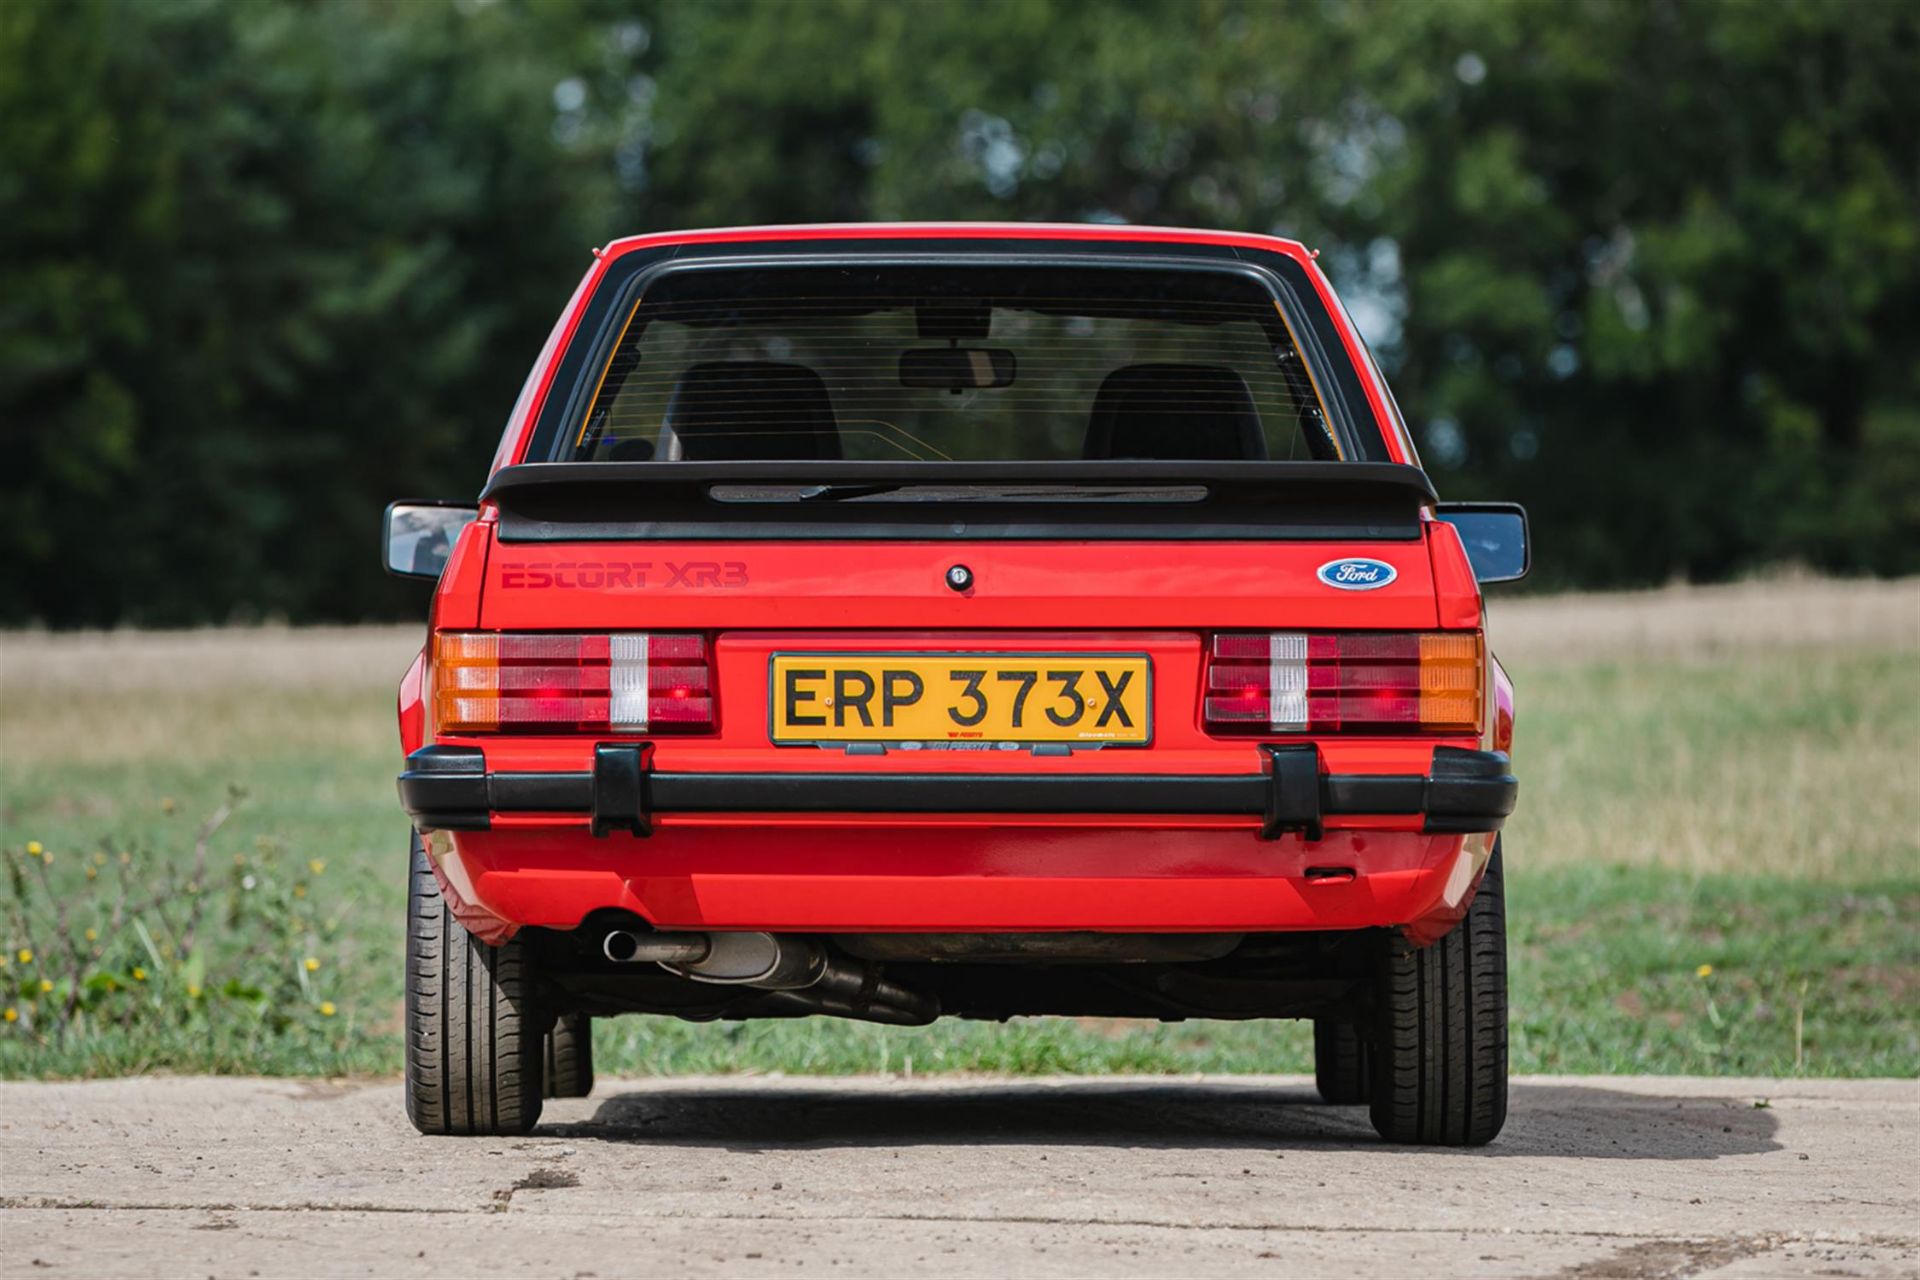 1982 Ford Escort XR3 - Image 7 of 10